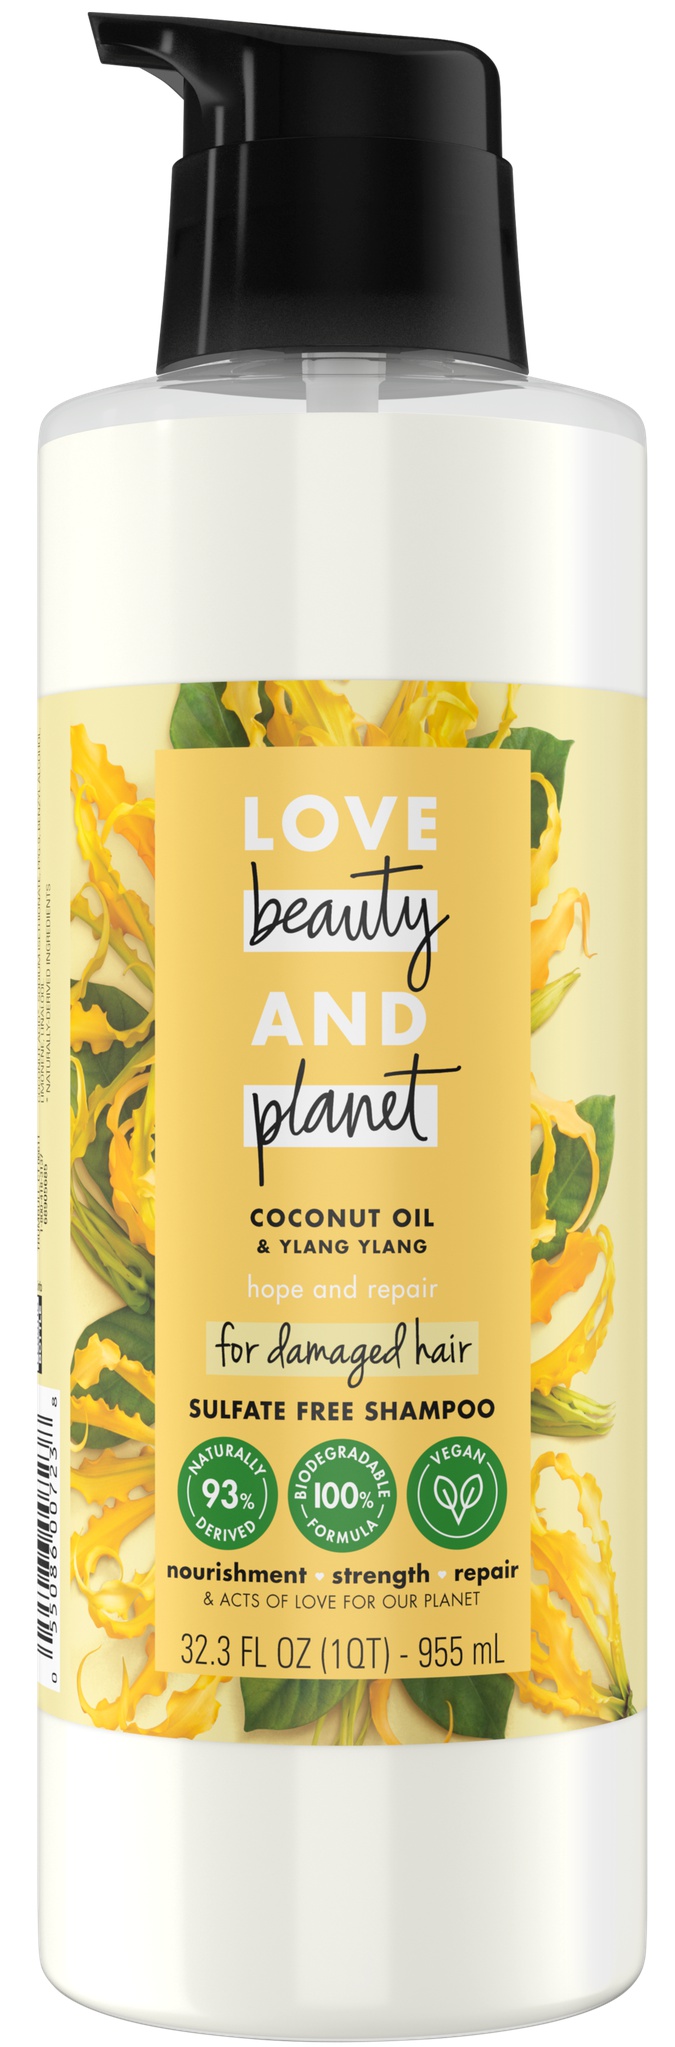 LOVE BEAUTY & PLANET Coconut Oil & Ylang Ylang Sulfate Free Shampoo